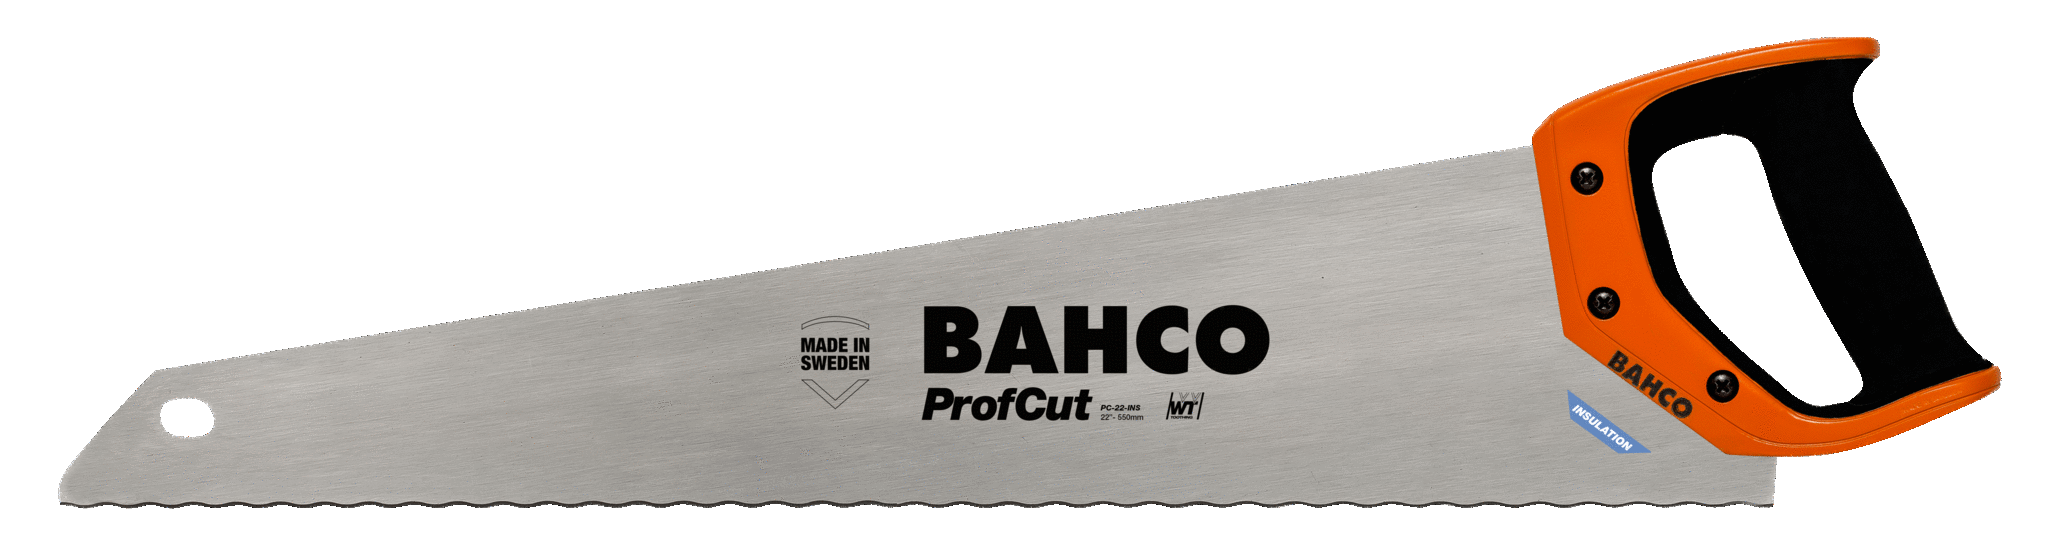 Bahco 22In Insulation Saw